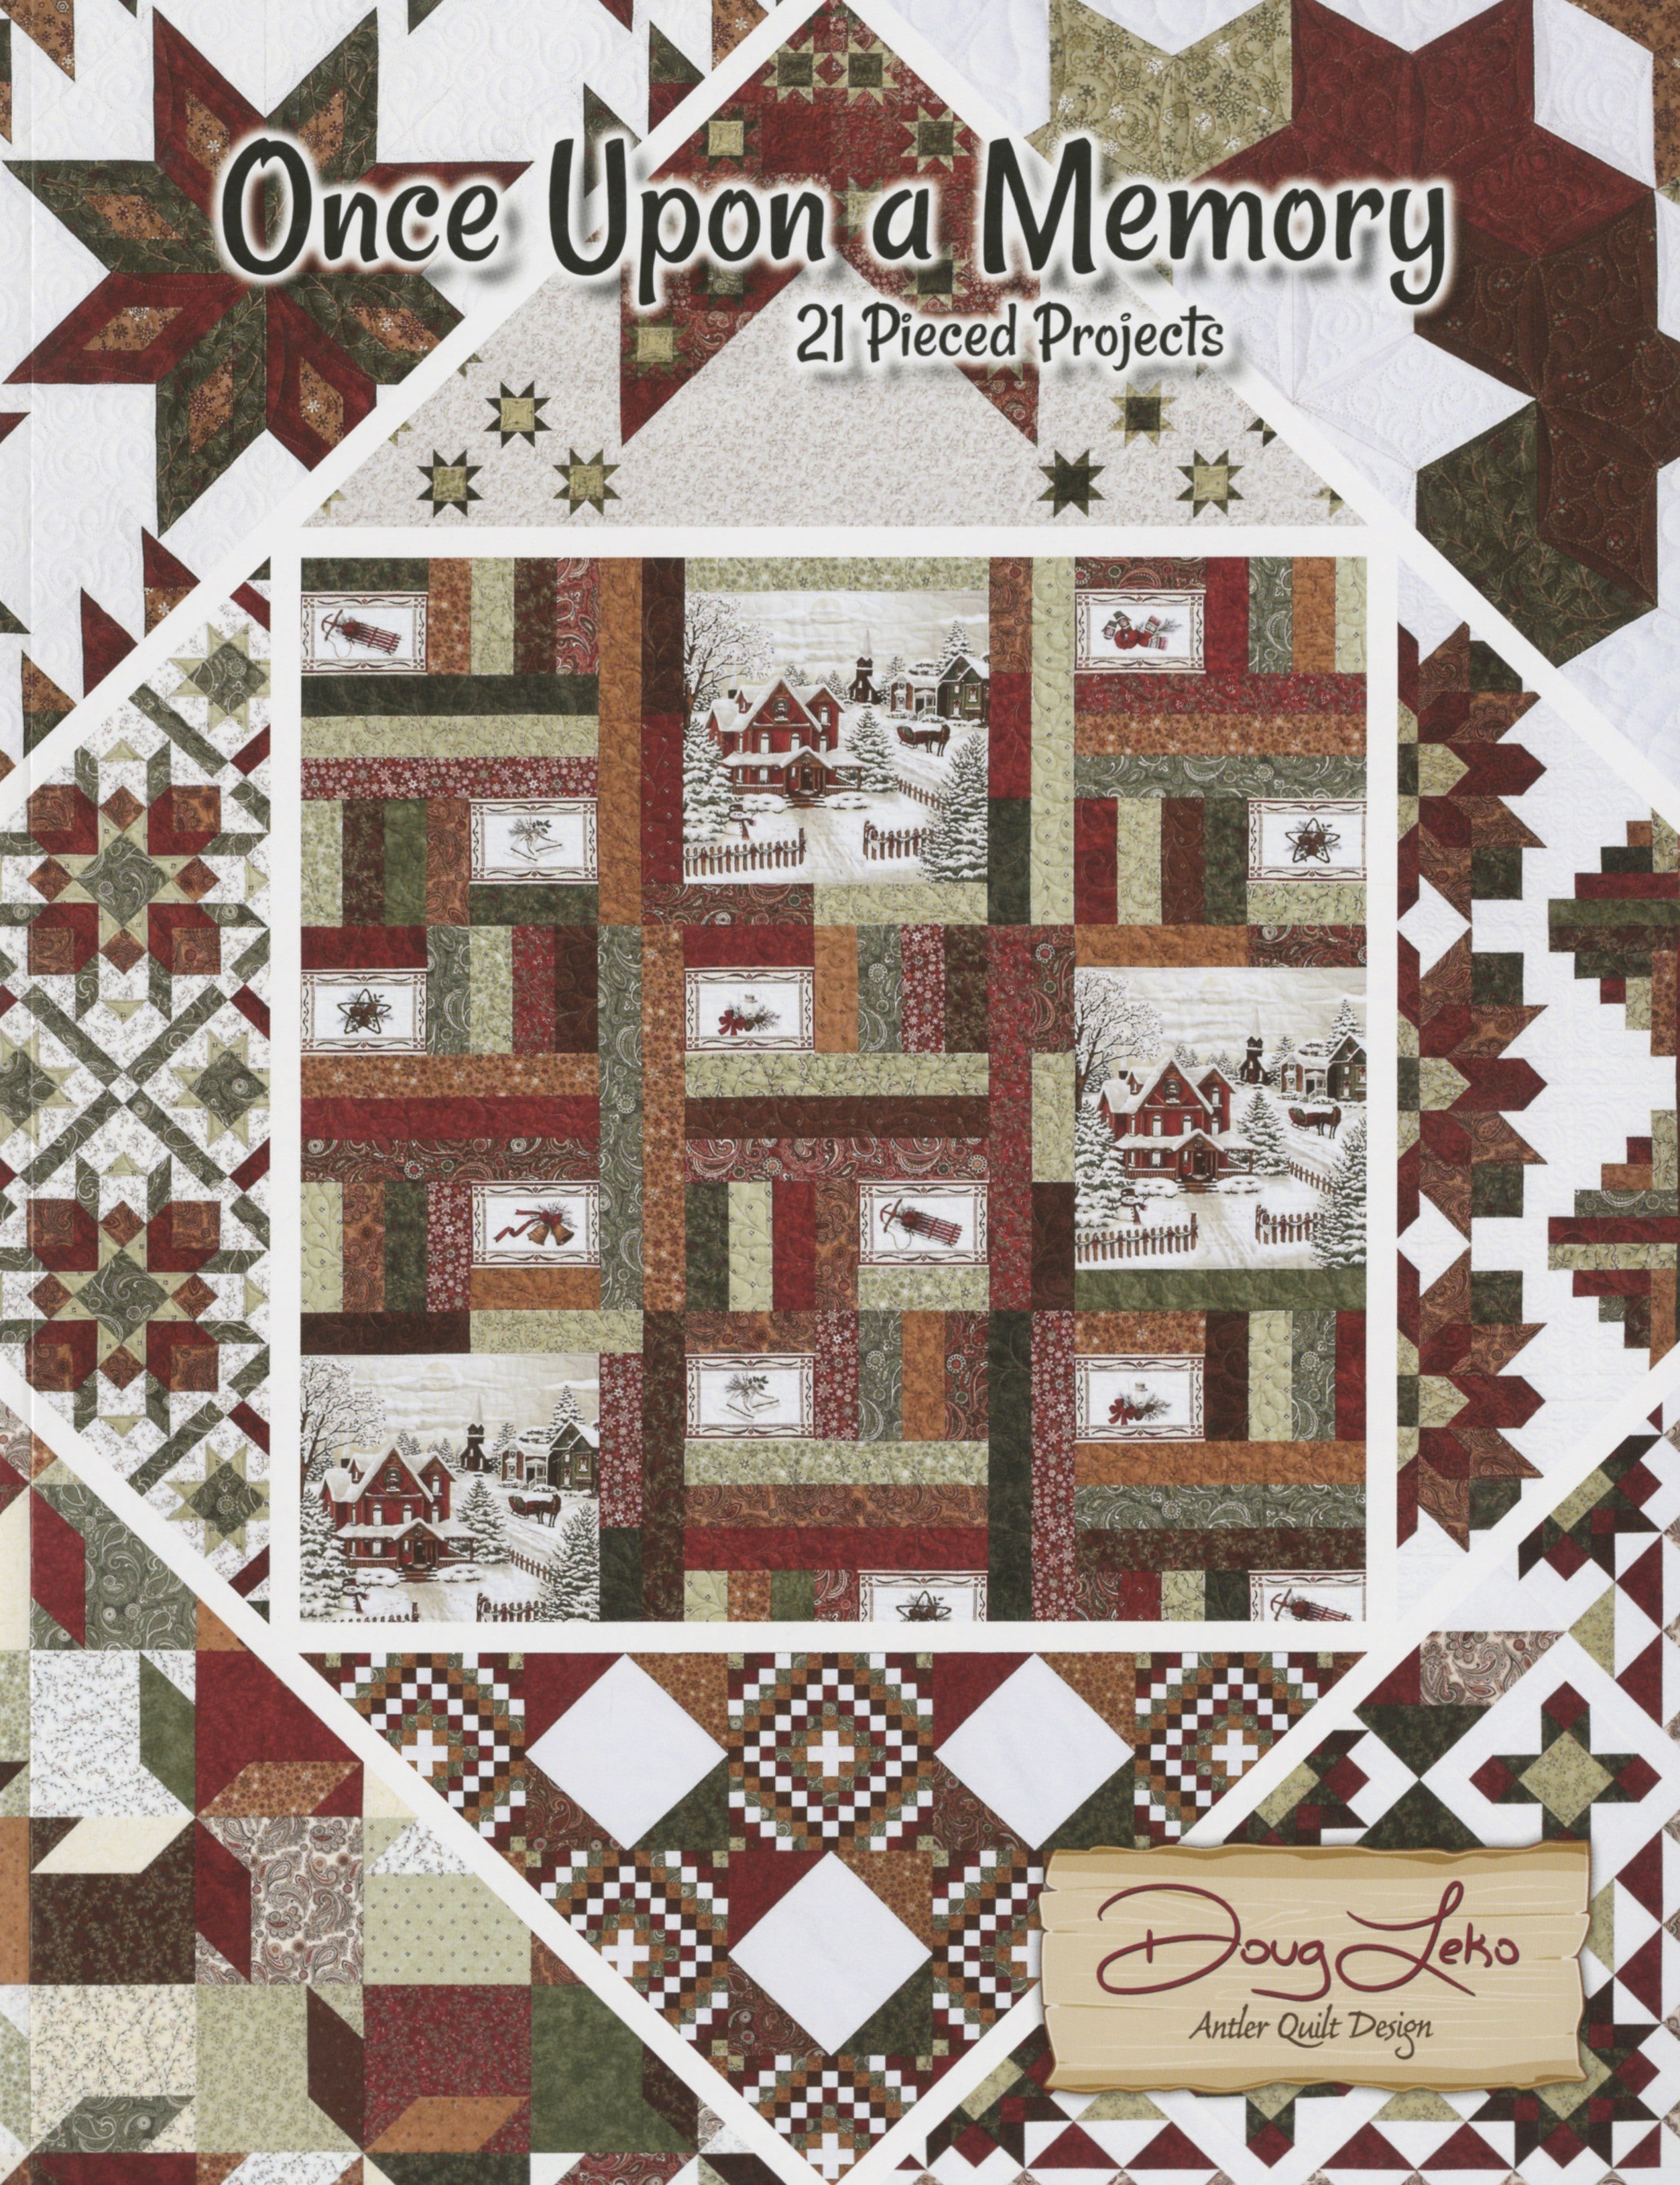 Once Upon a Memory Quilt Pattern Book by Doug Leko of Antler Quilt Designs - Dings & Dents